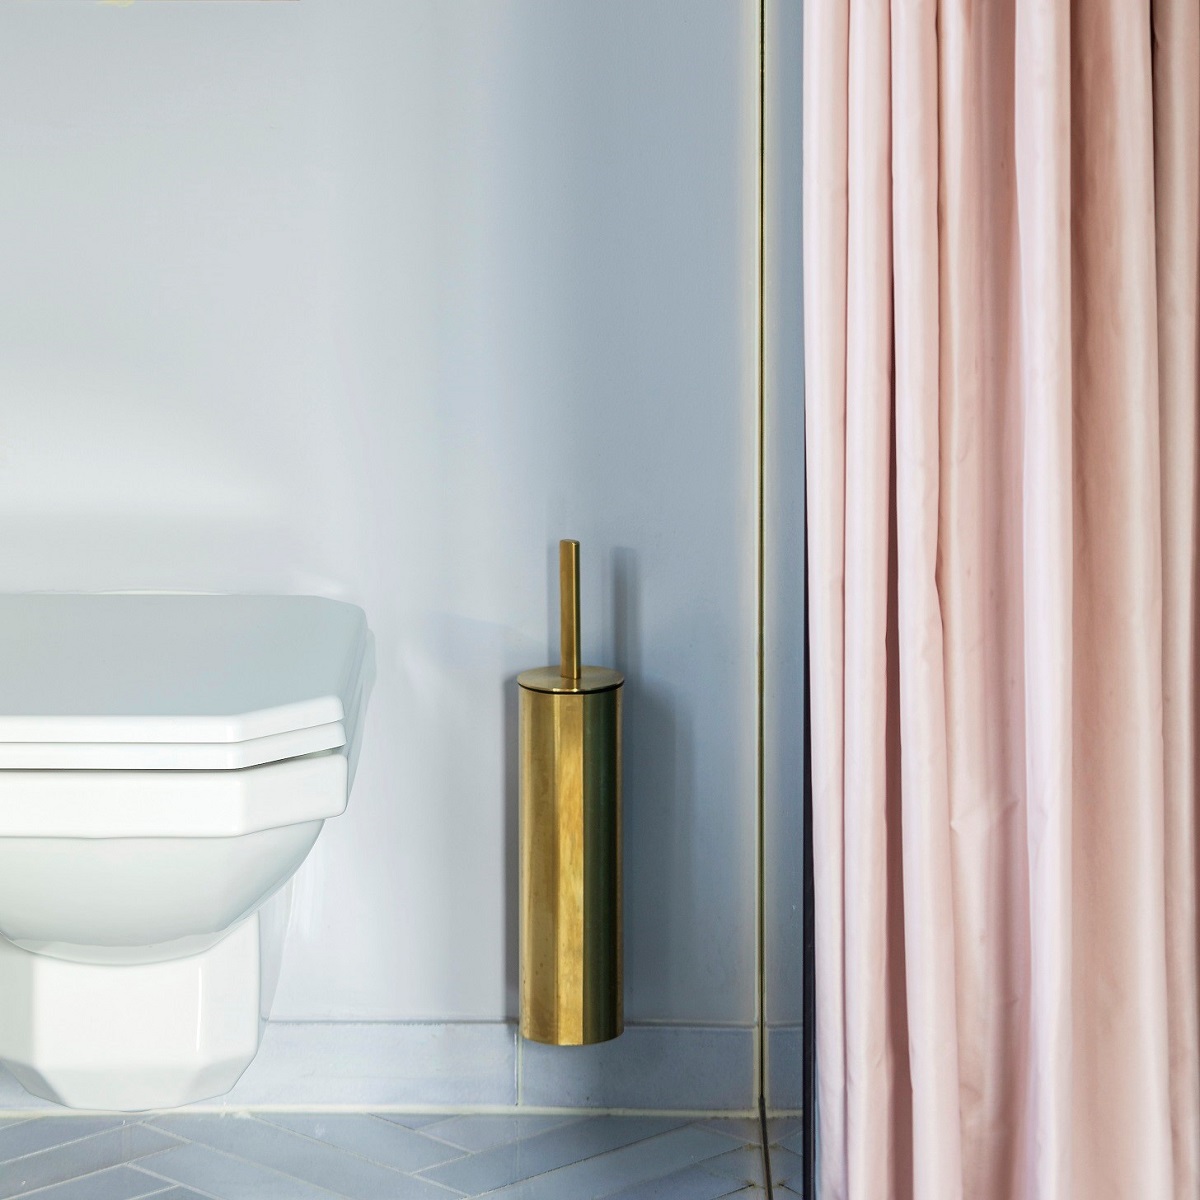 white vintage style toilet against blue wall with pink shower curtain and brass fitting details